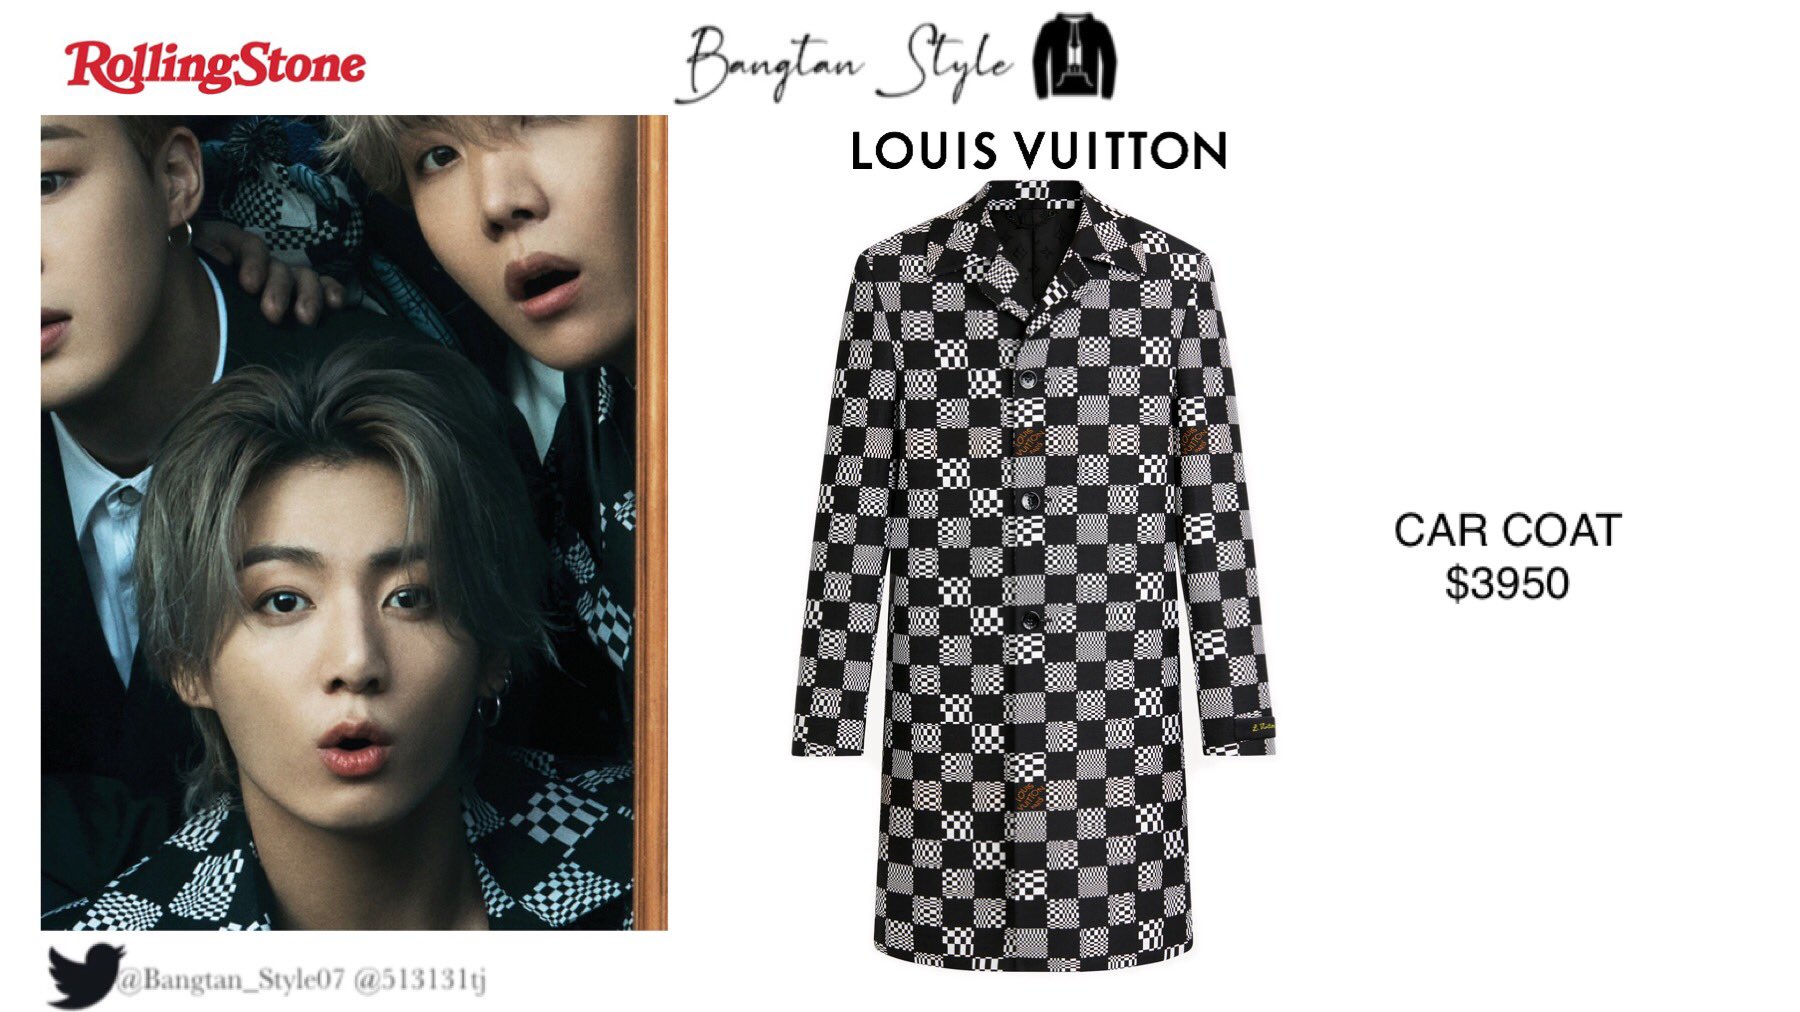 BTS Member Jungkook Is The Reason Why A $2,850 Louis Vuitton